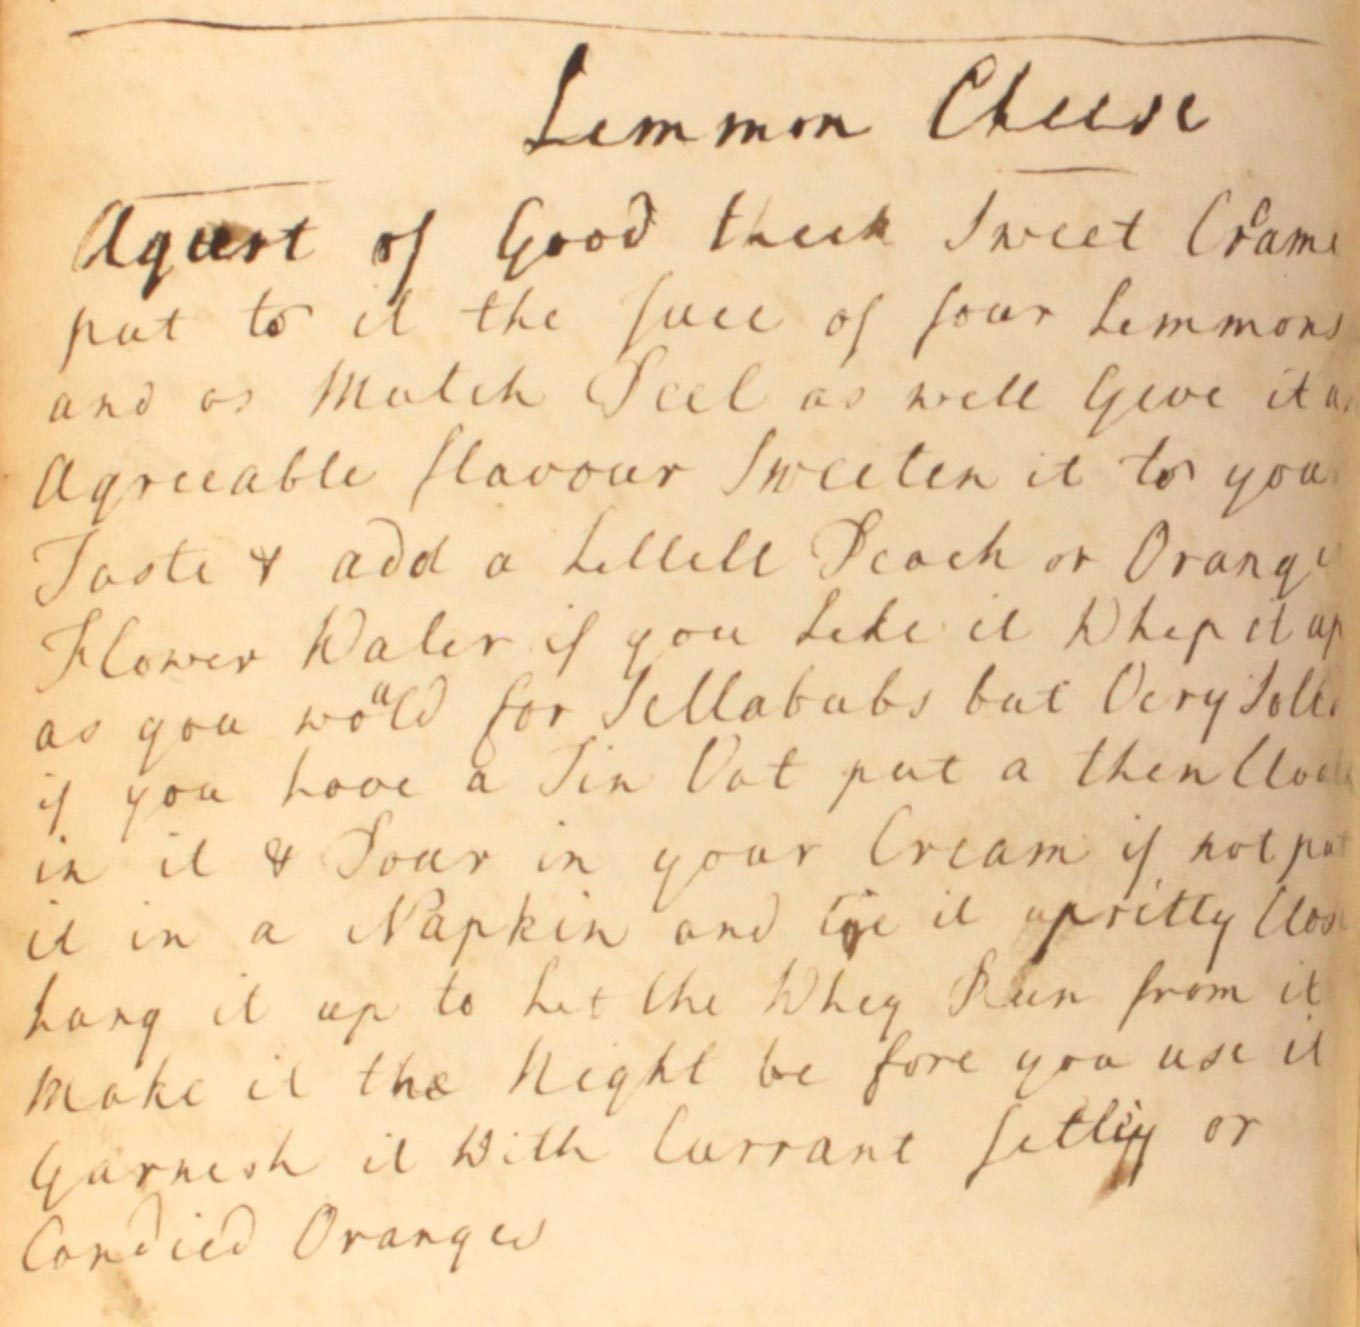 Lemon cheese recipe from  The Cookbook of Unknown Ladies.